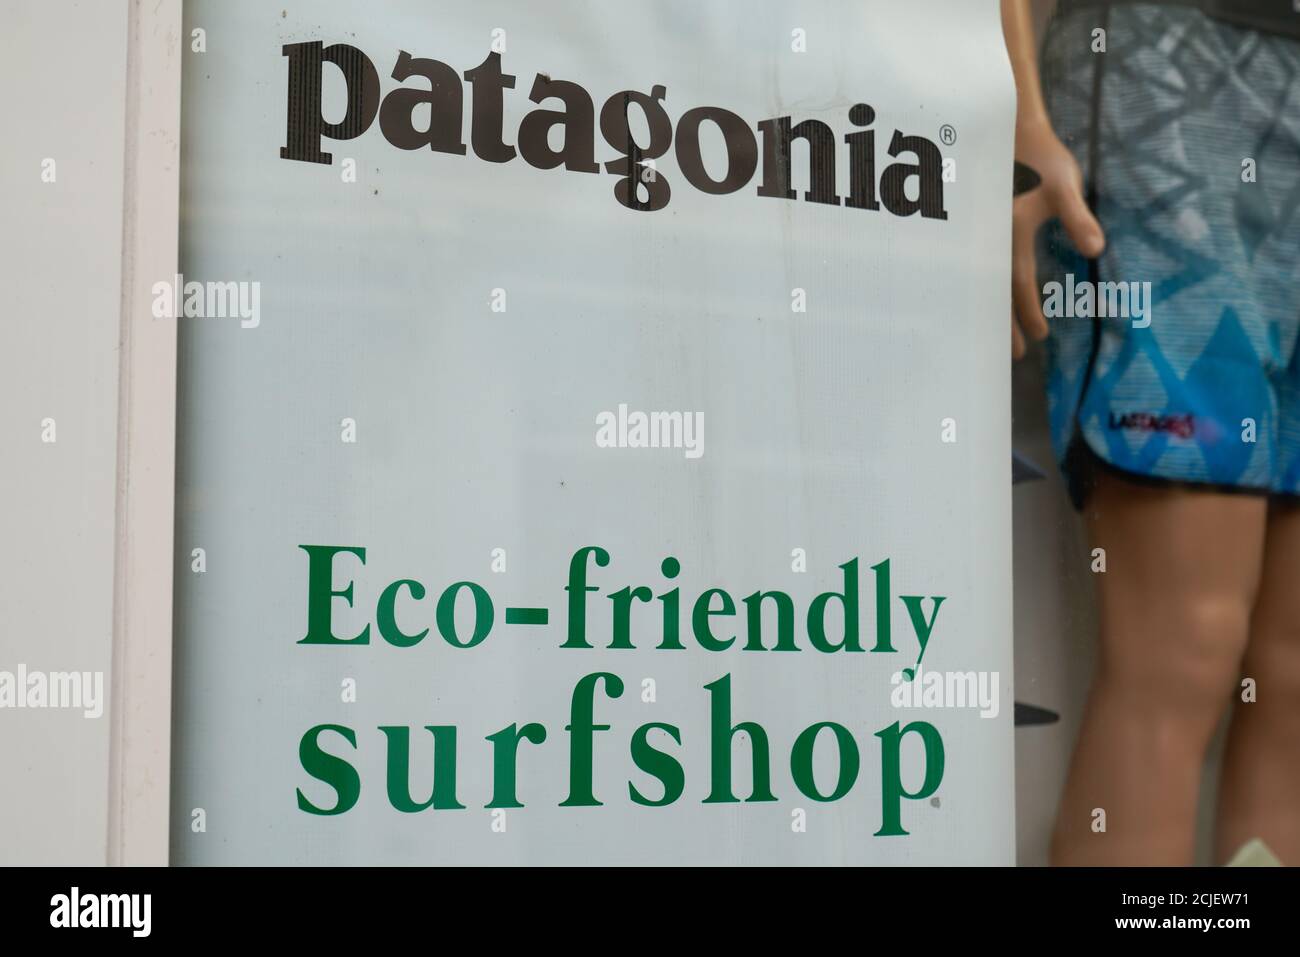 Bordeaux , Aquitaine / France - 09 01 2020 : Patagonia store logo above the entrance to shop with text eco-friendly Stock Photo - Alamy